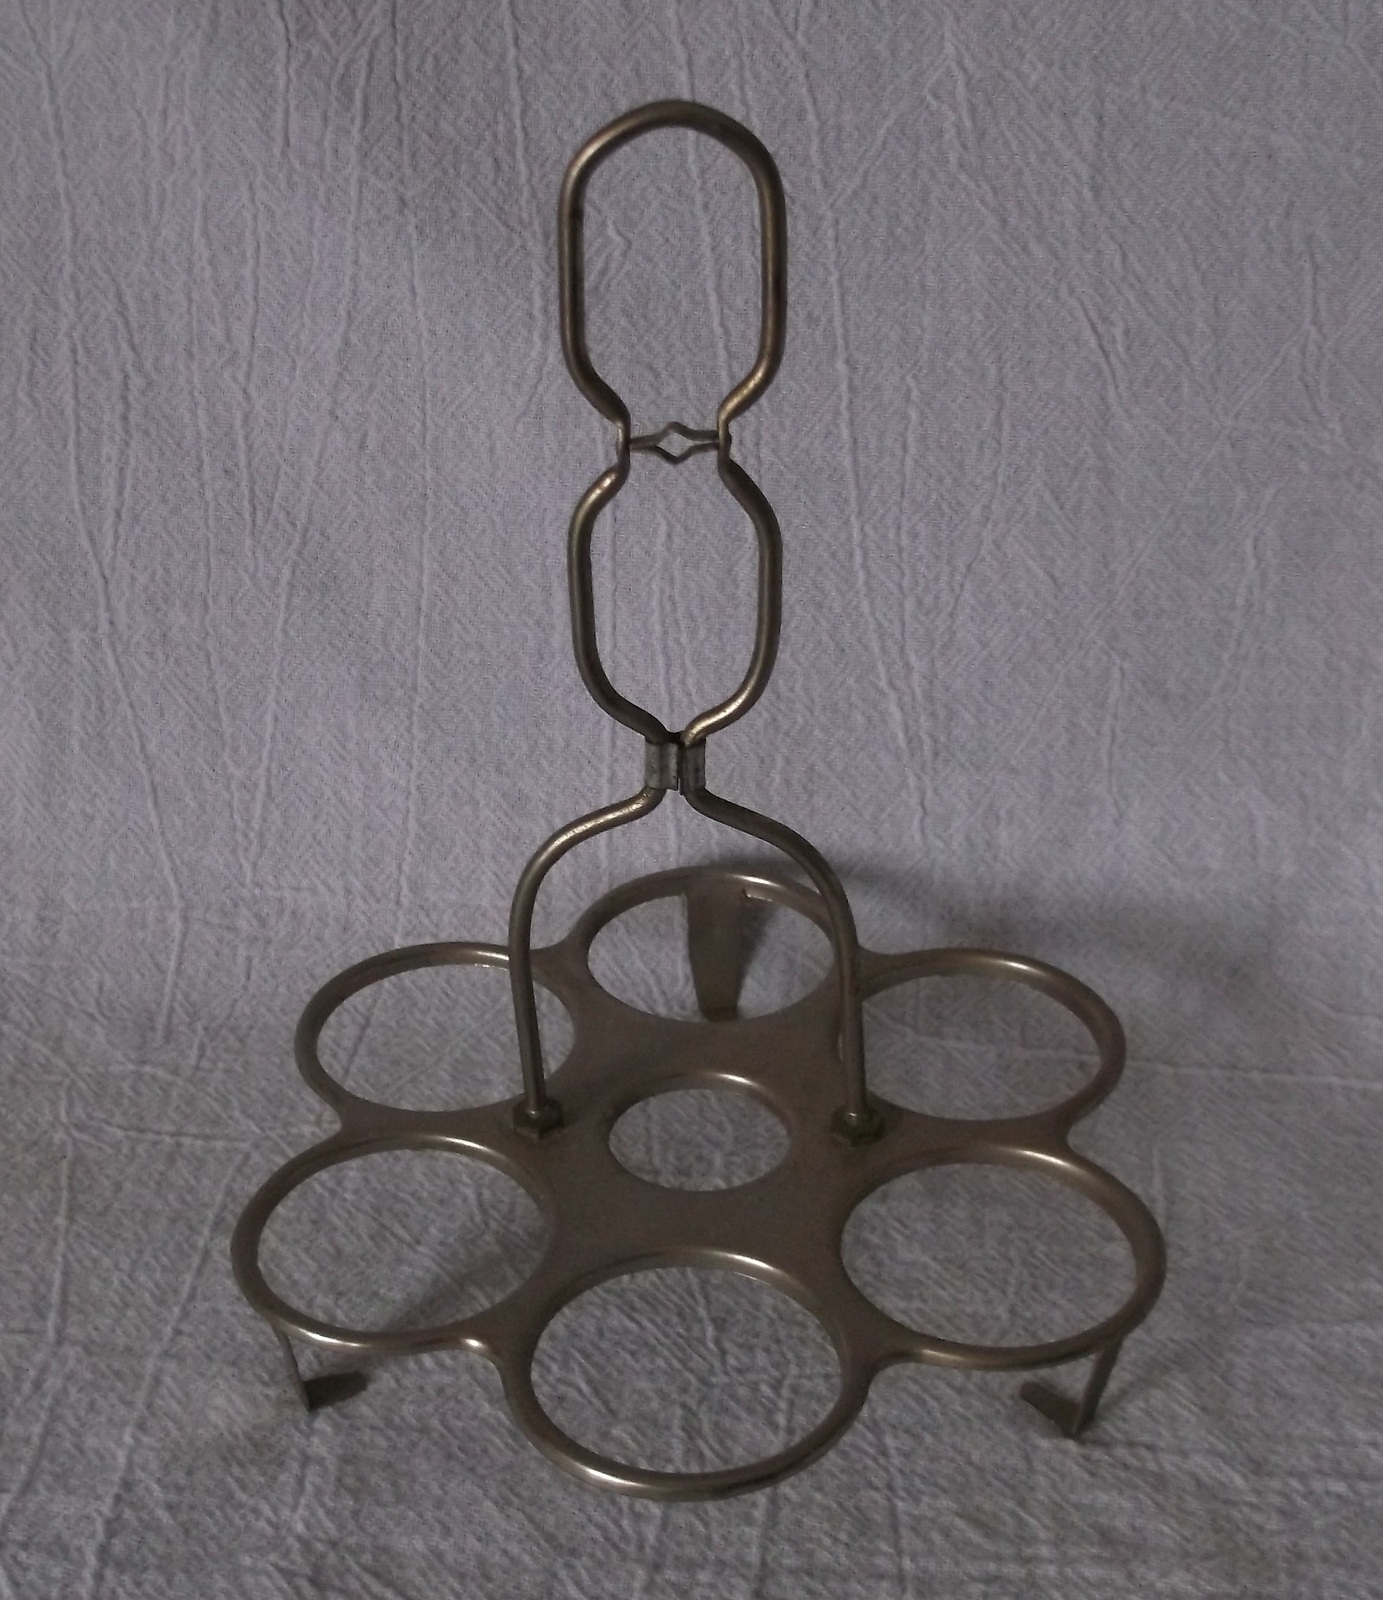 Vintage Egg Holder Metal Stand Holds 6 To 7 Eggs Poached Hard Boiled Other